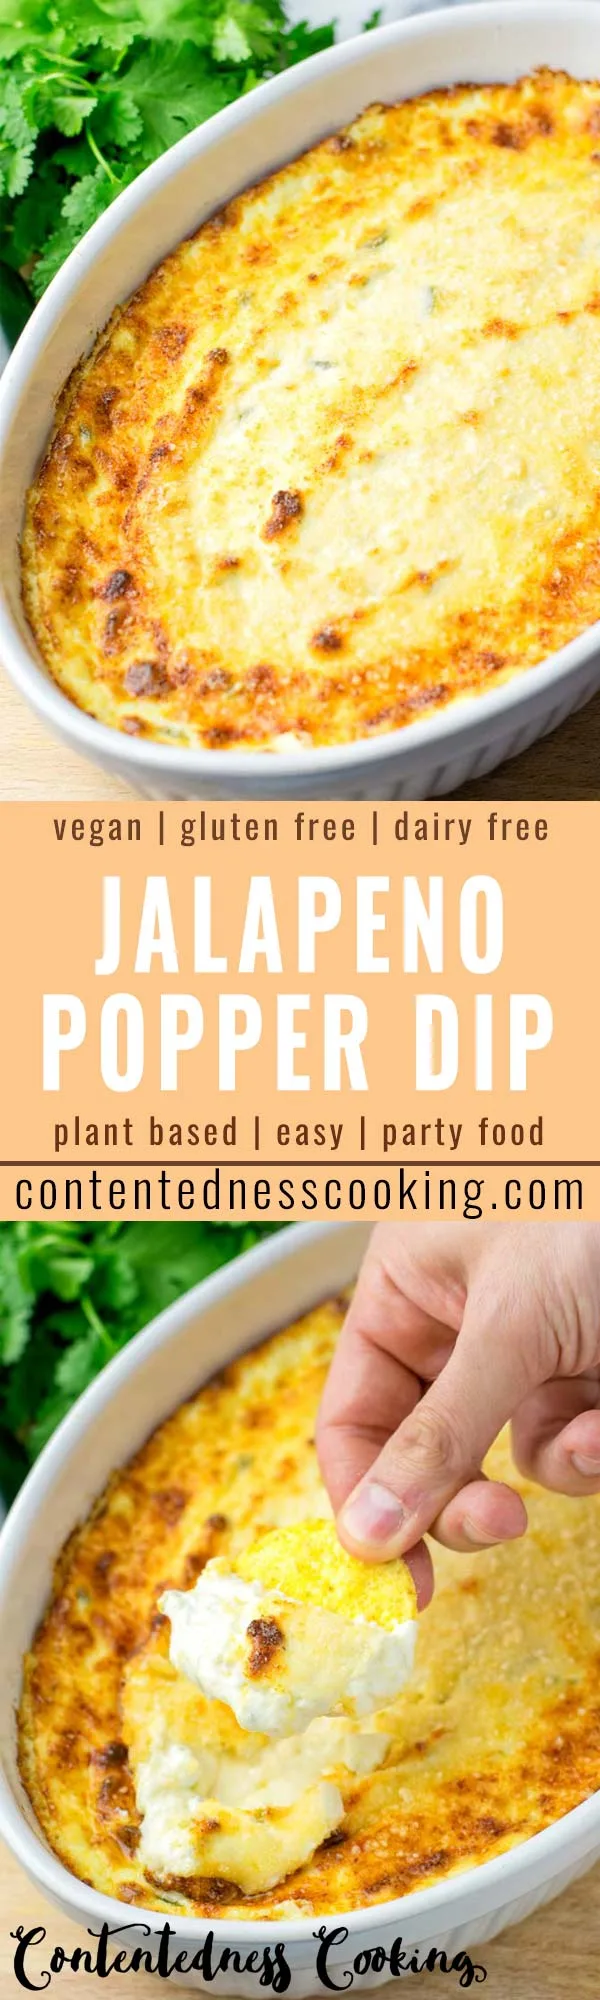 This Jalapeno Popper Dip is easy to make and delish hot or cold. If you are looking for a not only vegetarian but also vegan jalapeno dip recipe, this is the best one for you. It is super satisfying packed with flavors, great for parties, dinner, lunch, meal prep. 